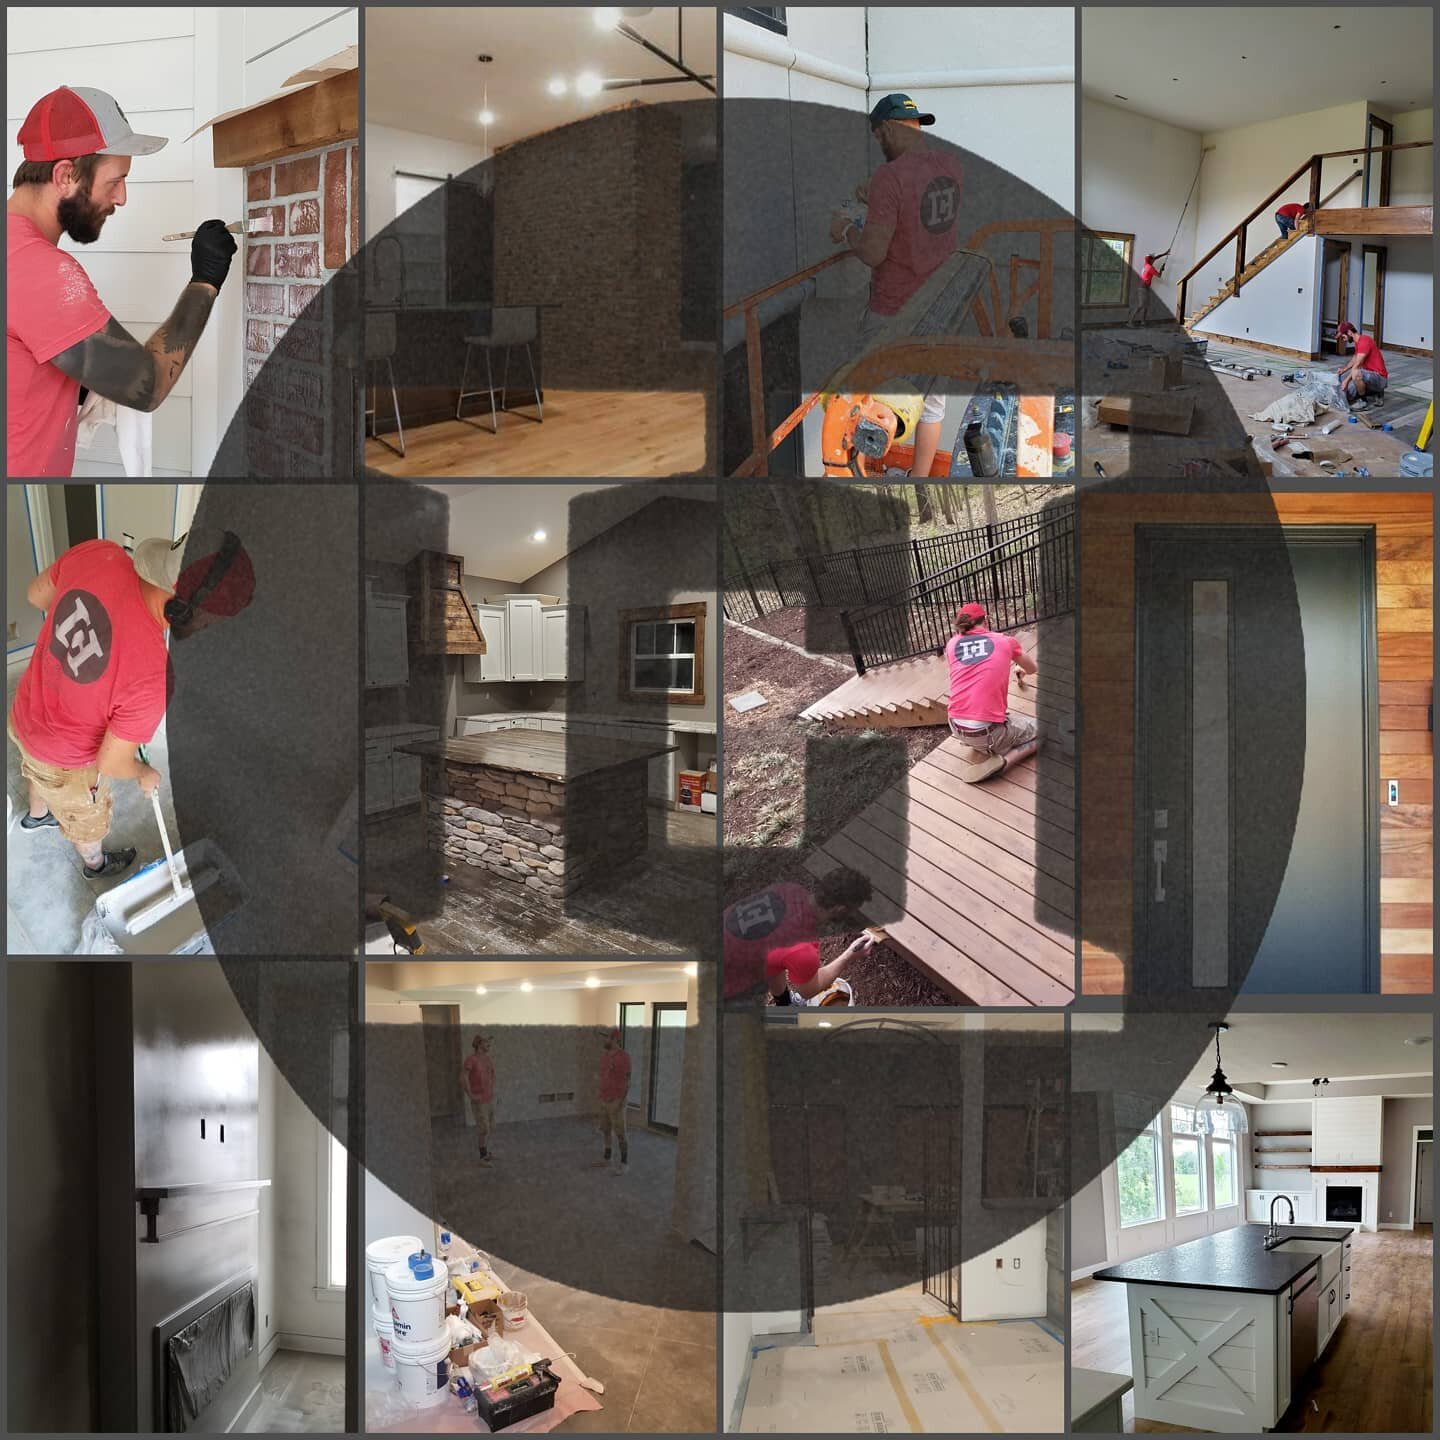 With a growing demand and good fortune, Homecraft Mo LLC is currently seeking to acquire positive, reliable and driven individuals to fill several full time and part time positions. We work in new construction homes, commercial properties ,interior a